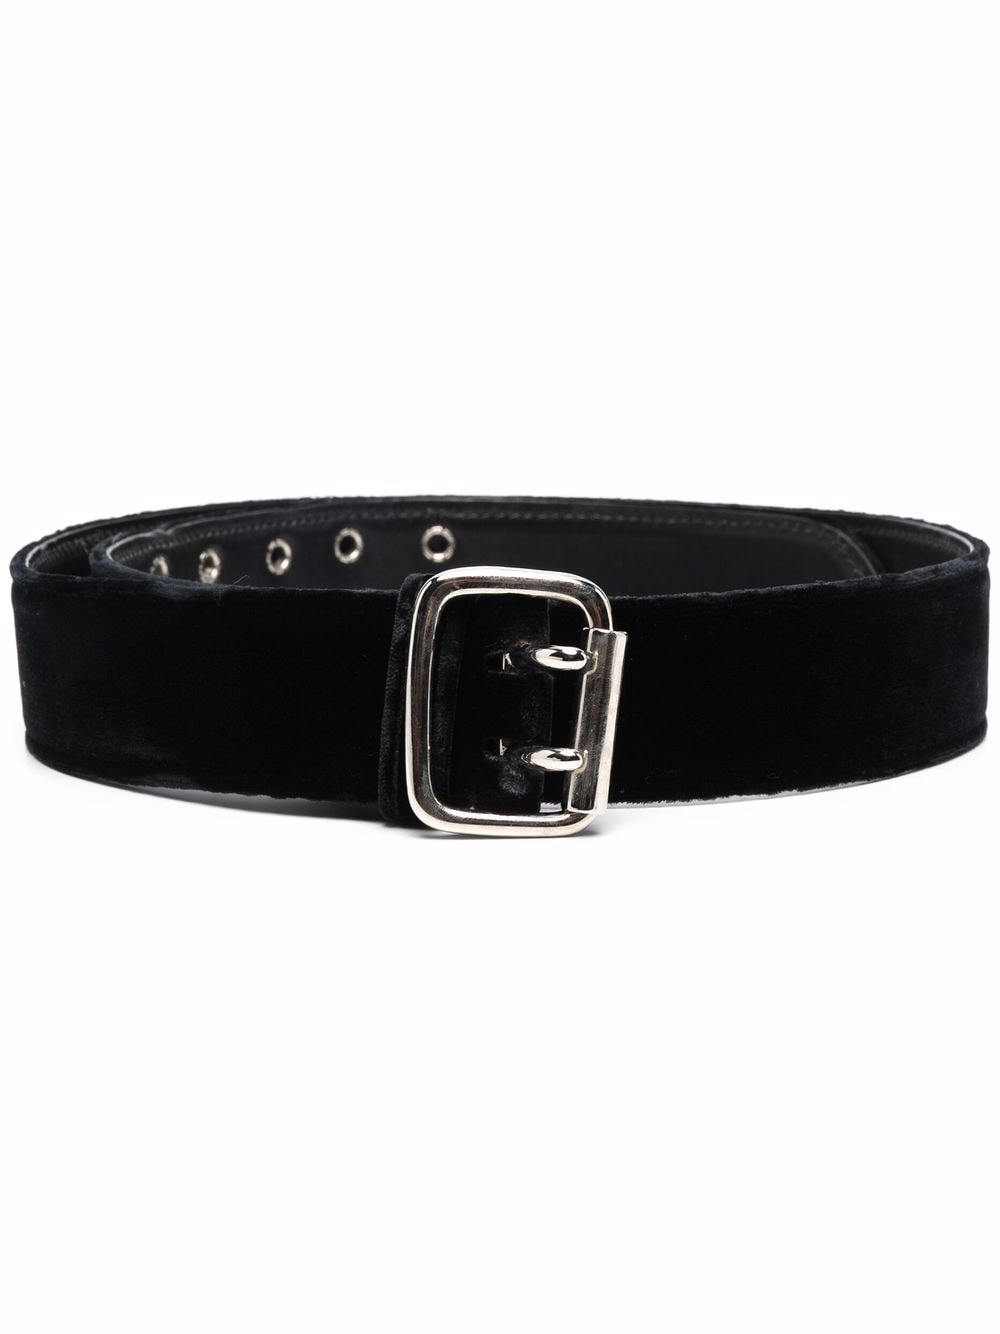 Gianfranco Ferré Pre-Owned 1990s double-pink buckled velvet belt - Black von Gianfranco Ferré Pre-Owned